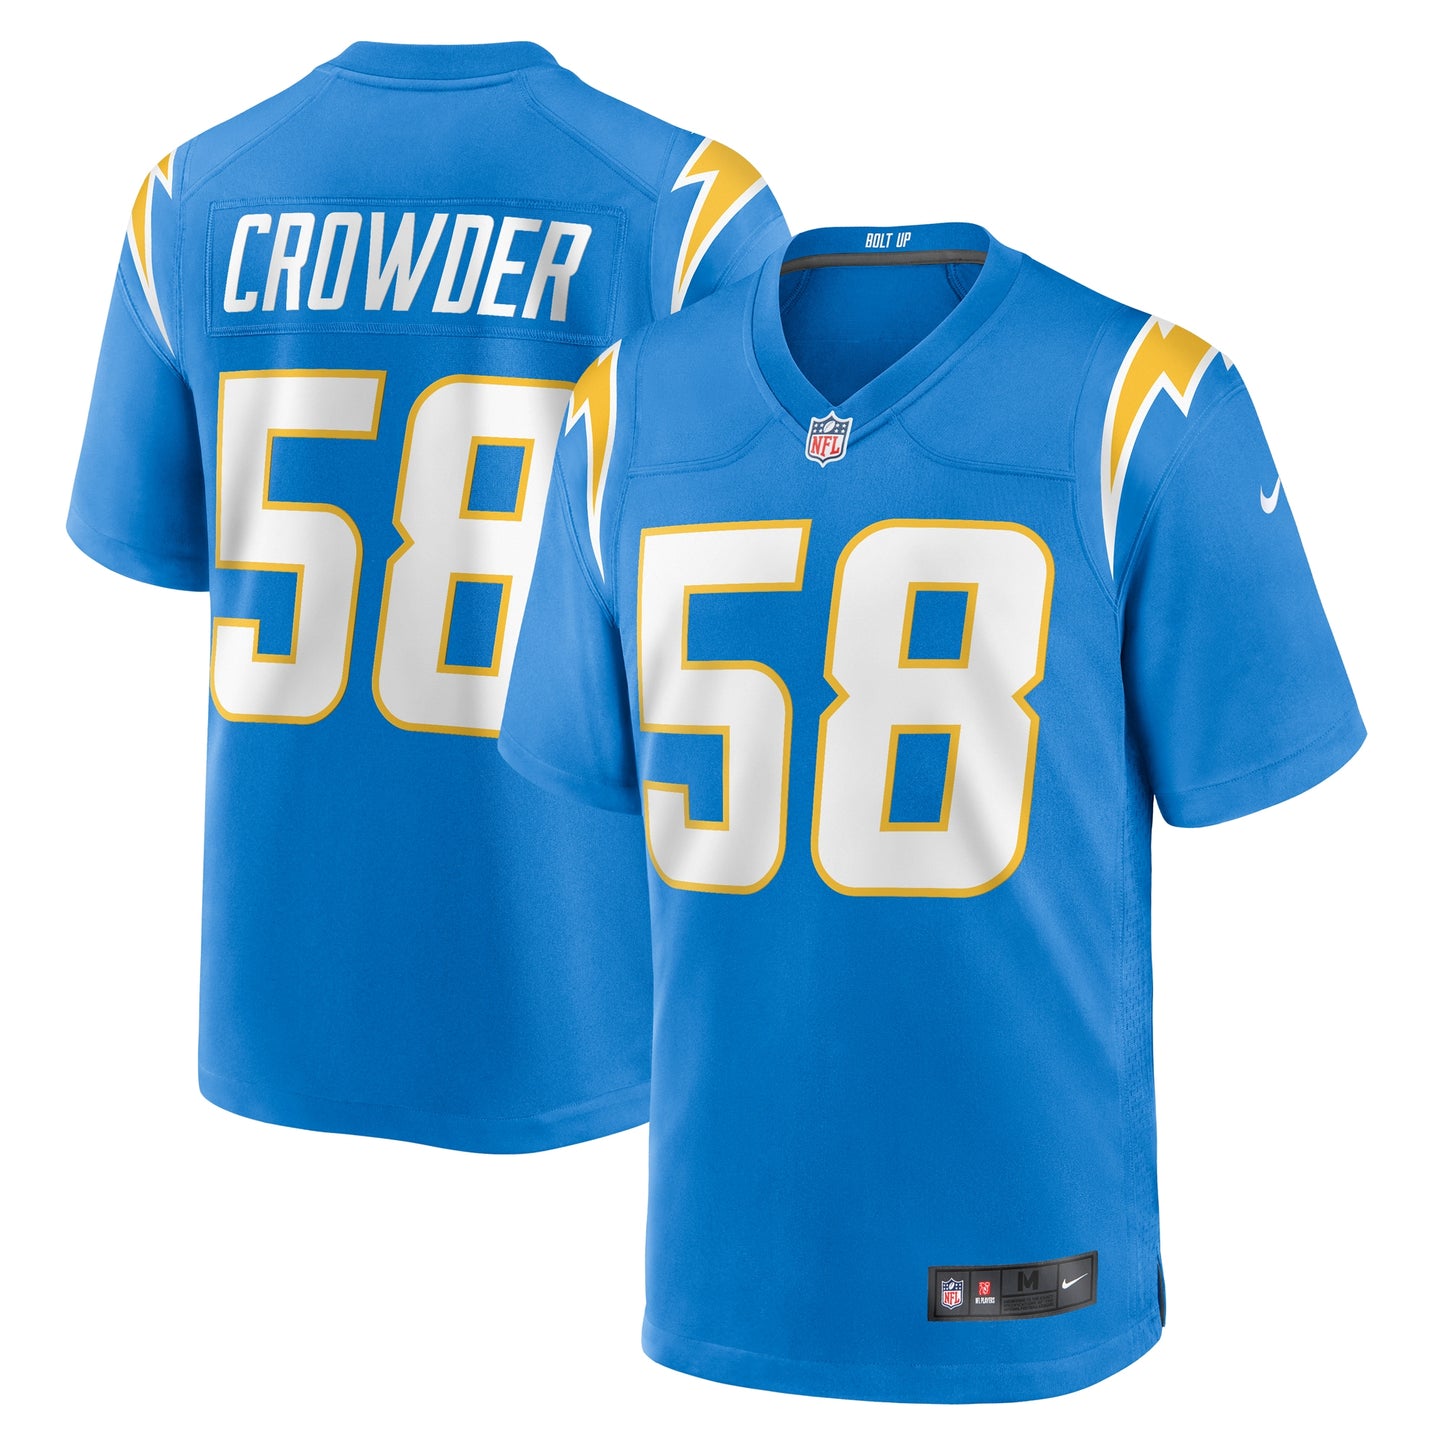 Tae Crowder Los Angeles Chargers Nike Team Game Jersey - Powder Blue